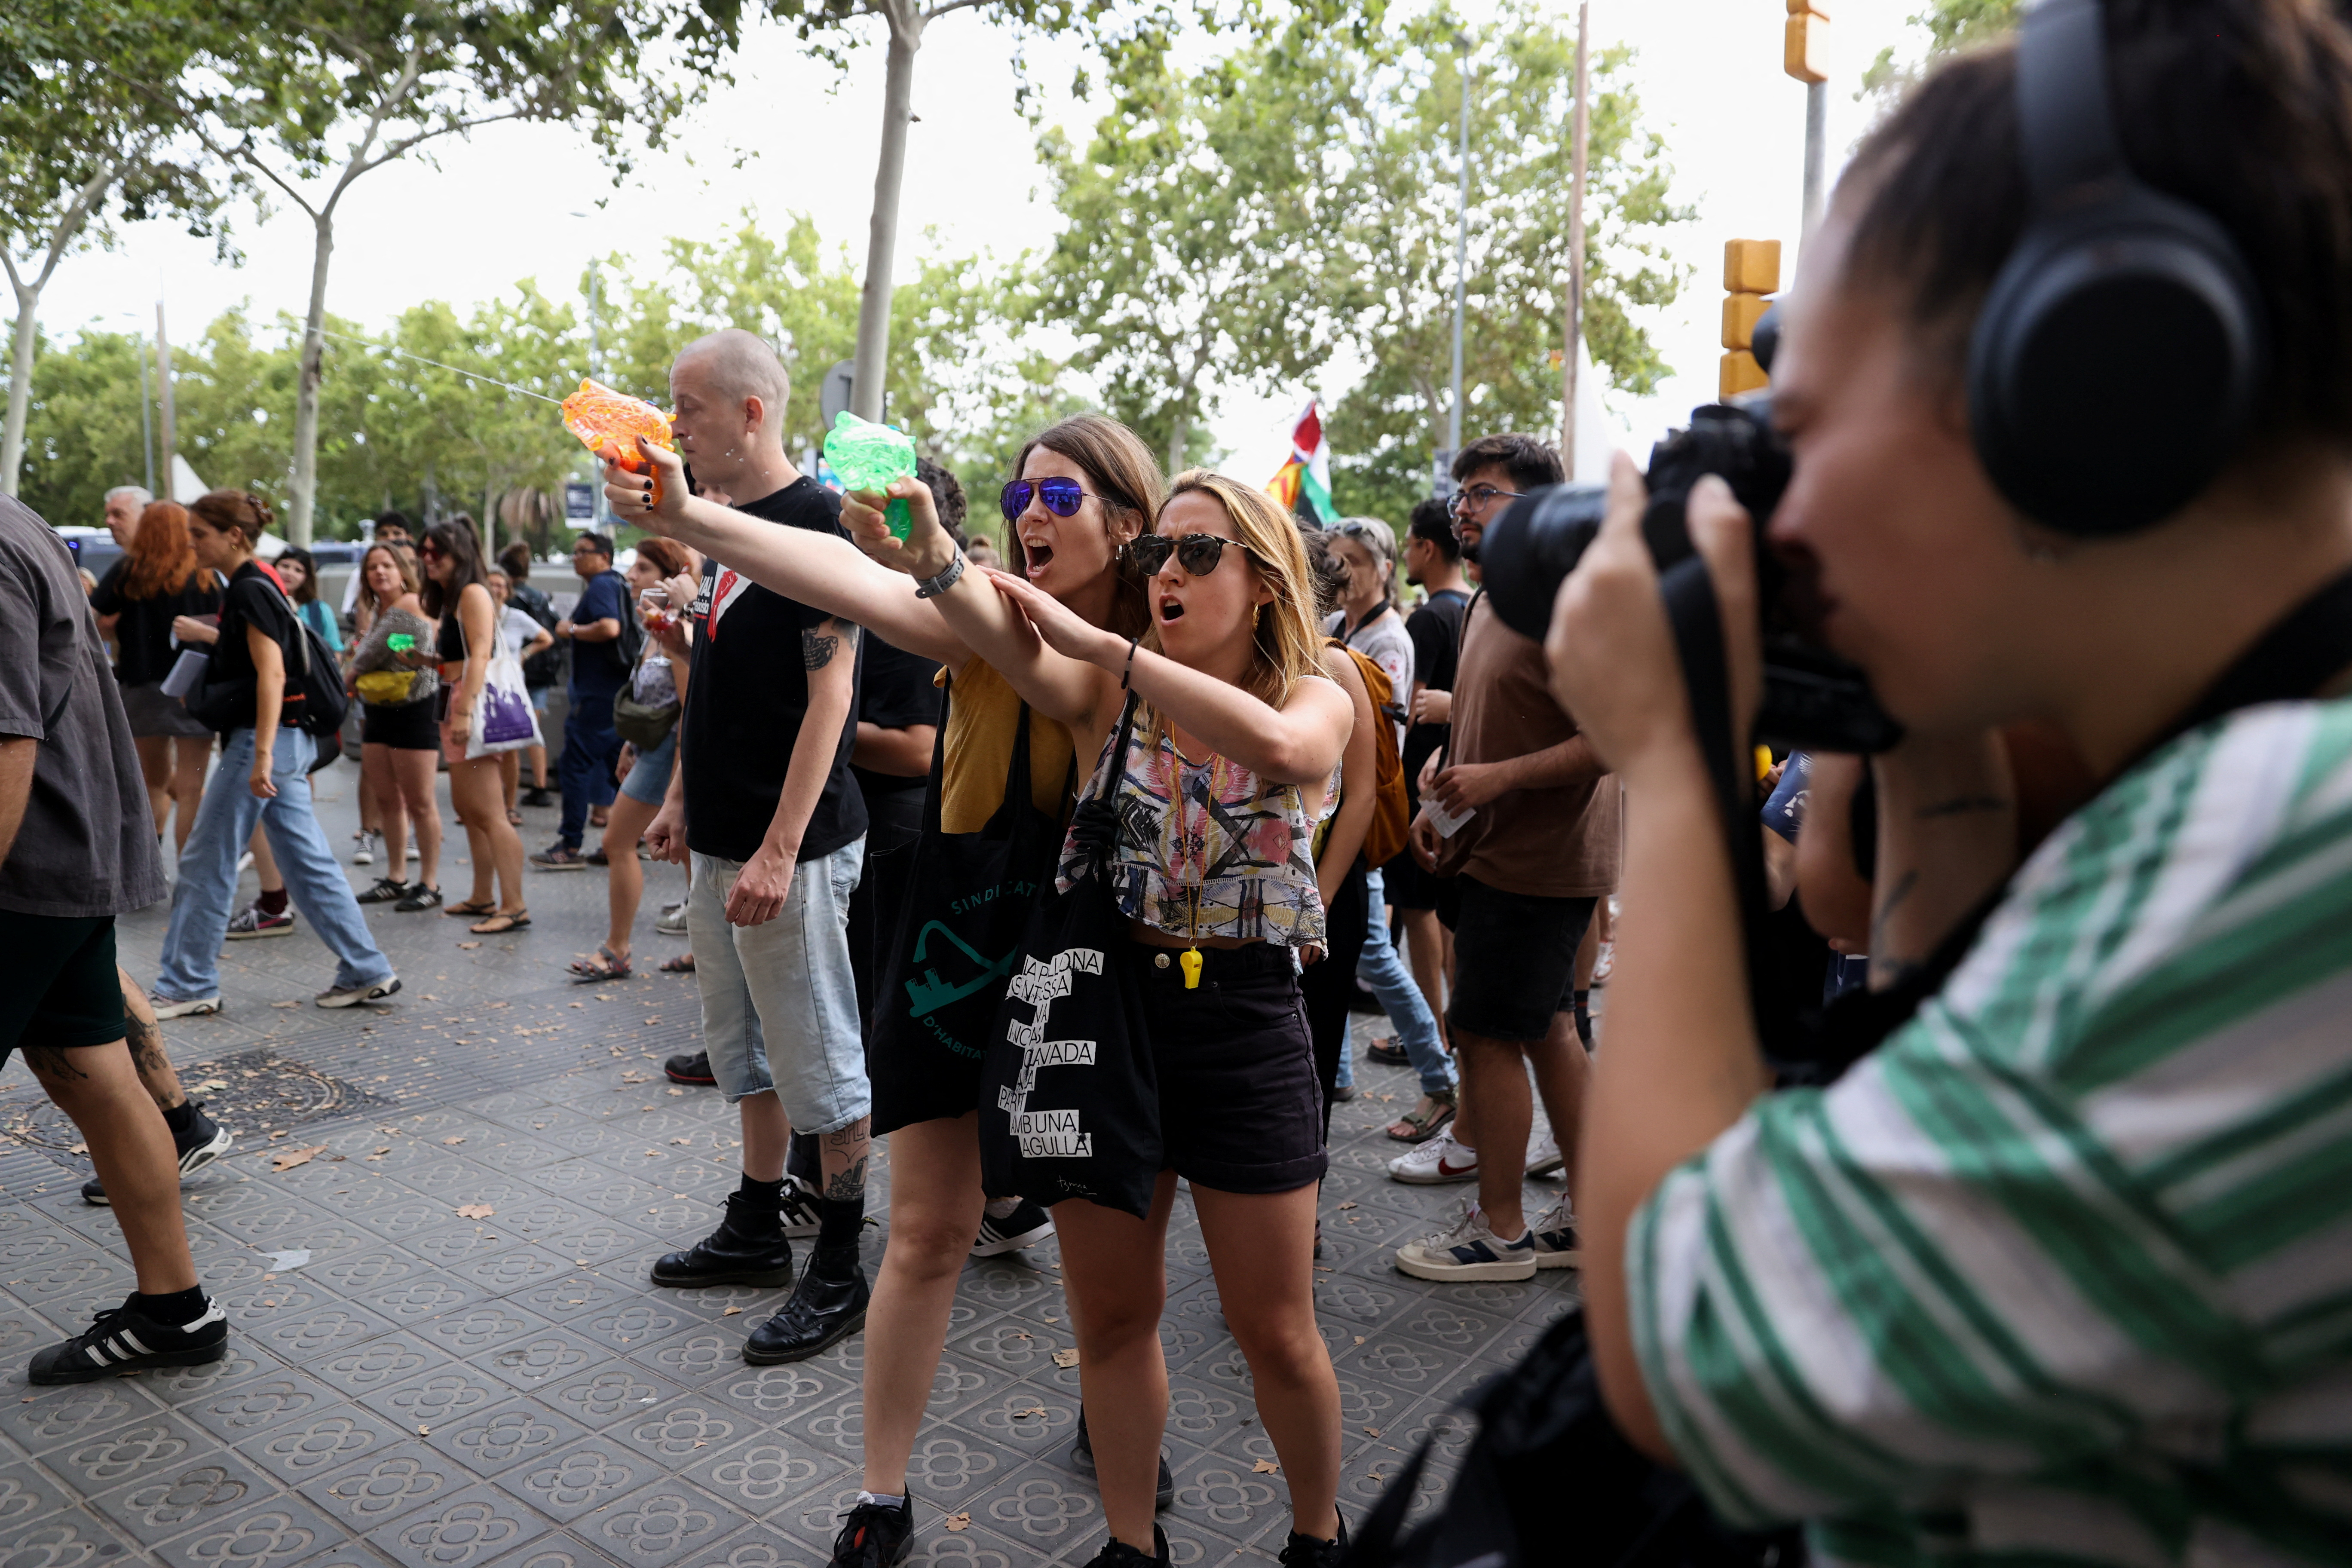 People protest against mass tourism in Barcelona